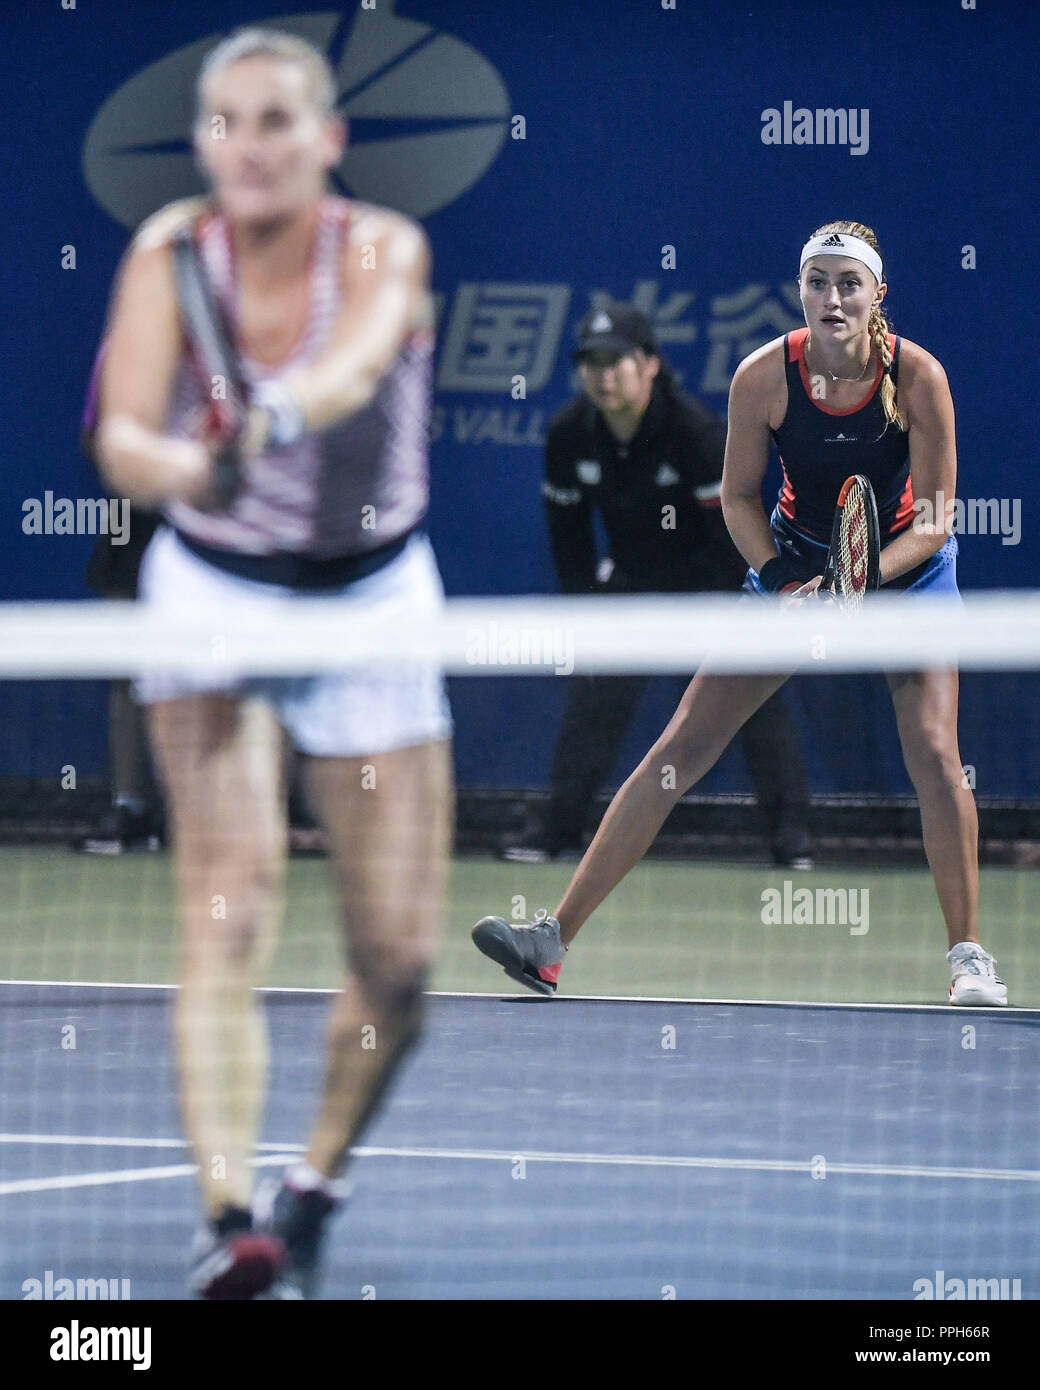 Wuhan. 26th Sep, 2018. Timea Babos (L) of Hungary and Kristina Mladenovic of France compete during doubles second round match against Kaitlyn Christian and Sabrina Santamaria of the United States at the 2018 WTA Wuhan Open tennis tournament in Wuhan of central China's Hubei Province, on Sept. 26, 2018. Babos and Mladenovic won 2-0. Credit: Xue Yubin/Xinhua/Alamy Live News Stock Photo